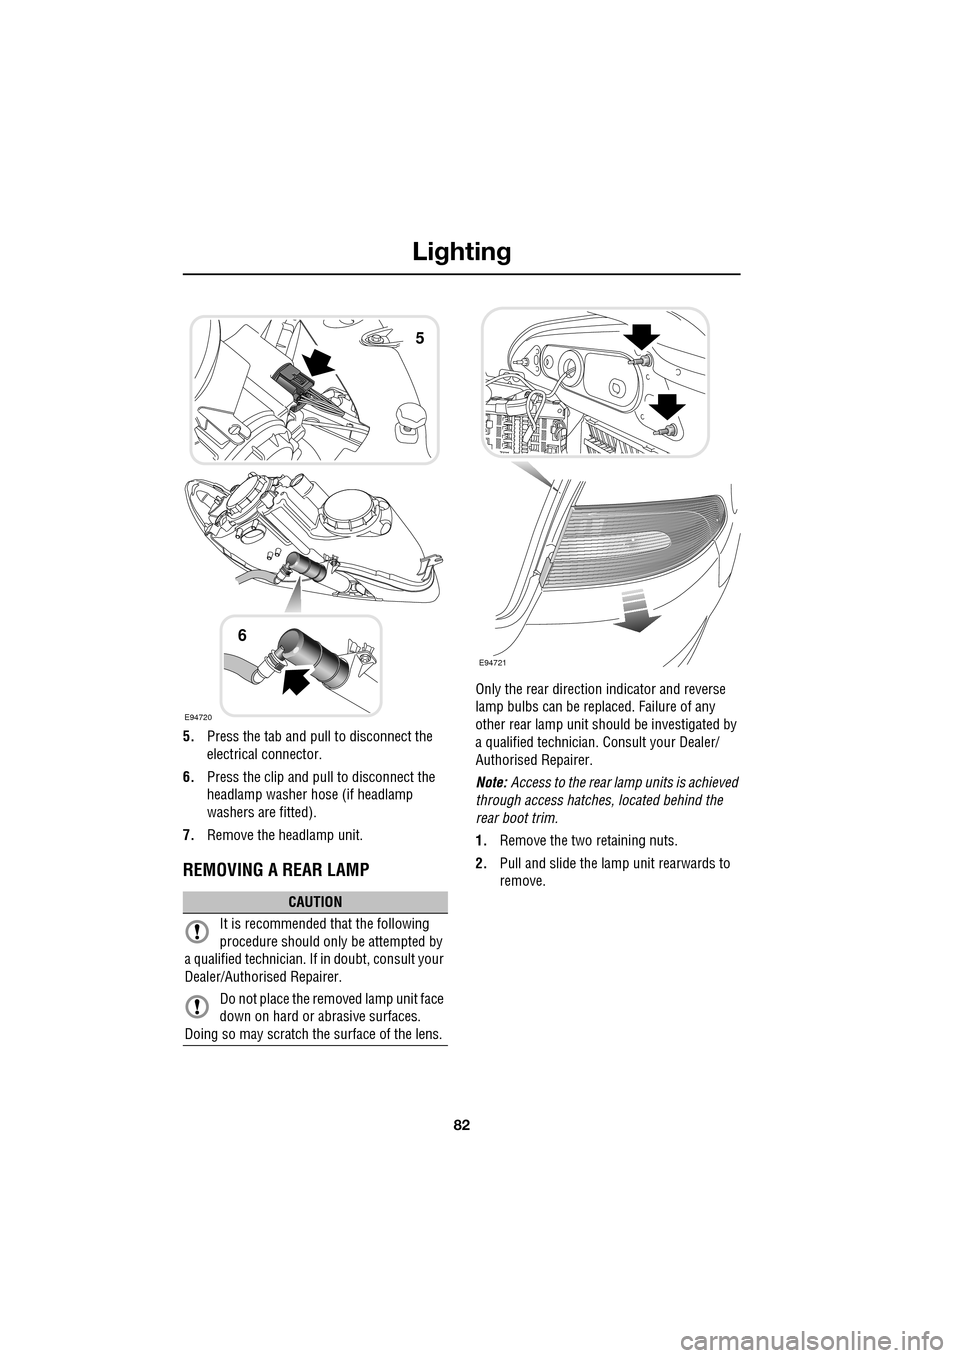 JAGUAR XF 2009 1.G Owners Manual Lighting
82
               
5.Press the tab and pull to disconnect the 
electrical connector.
6. Press the clip and pull to disconnect the 
headlamp washer hose (if headlamp 
washers are fitted).
7. R